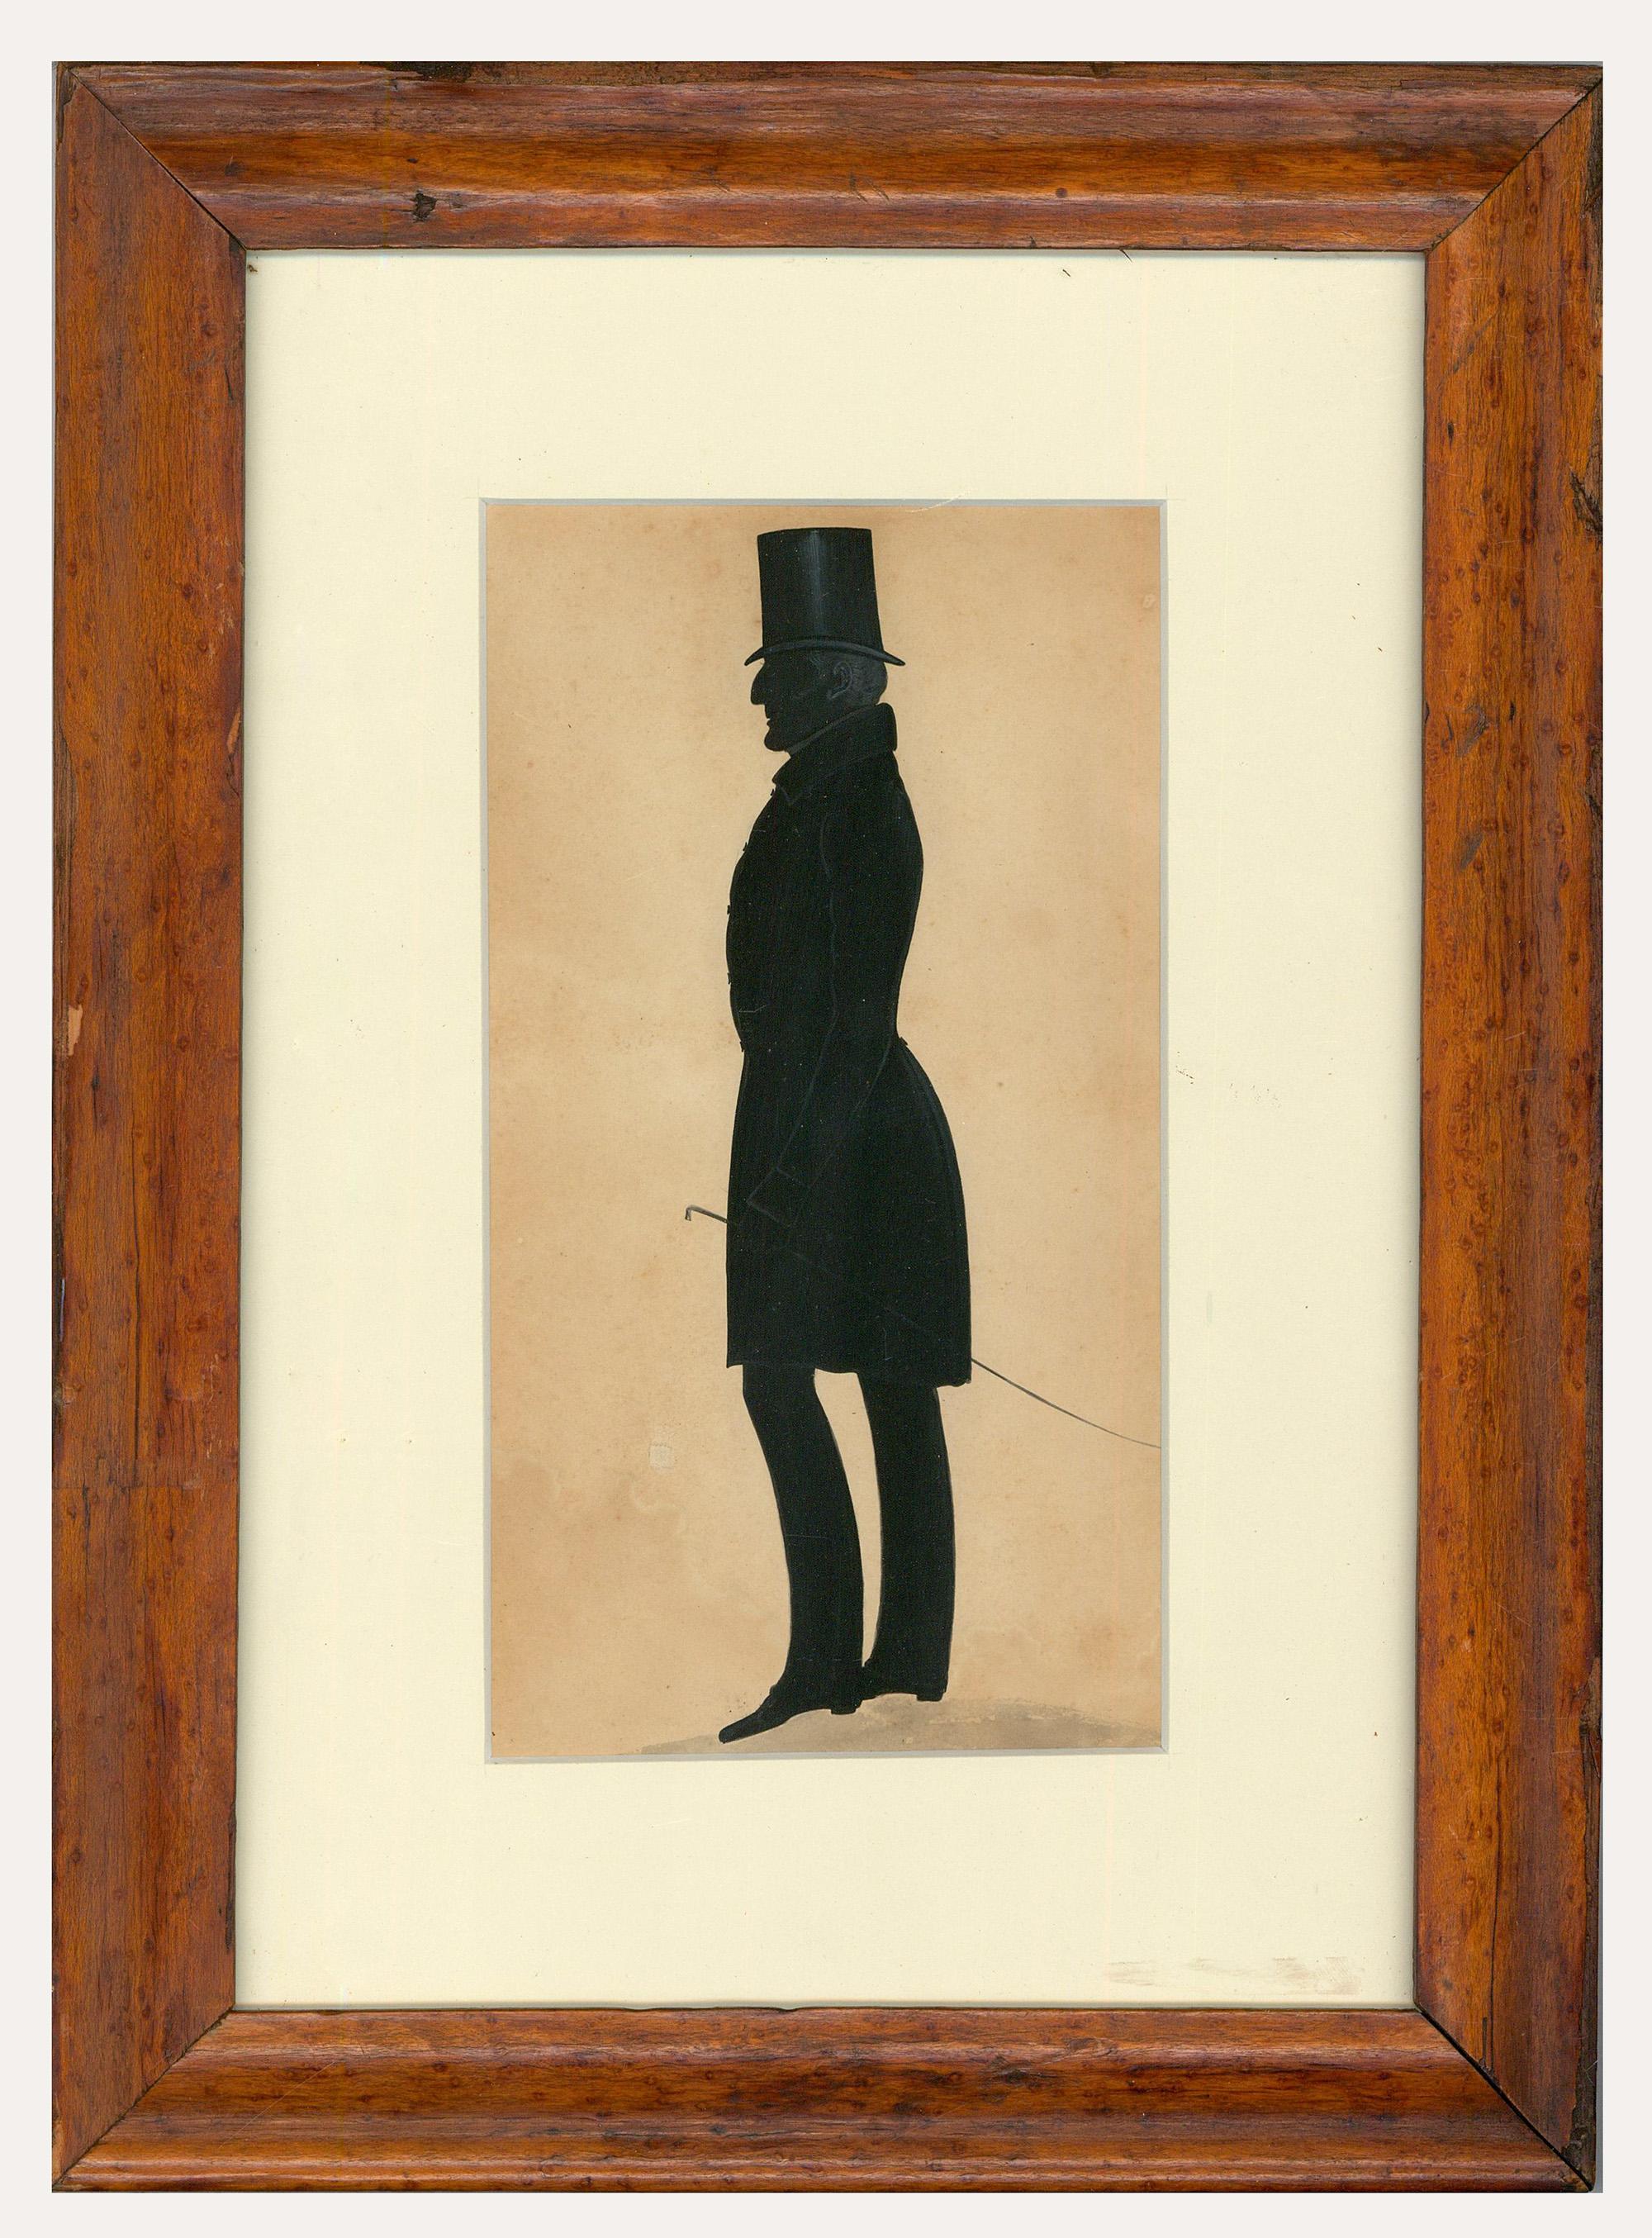 Unknown Portrait - Full-Length 19th Century India Ink Silhouette - Victorian Gentleman in Profile